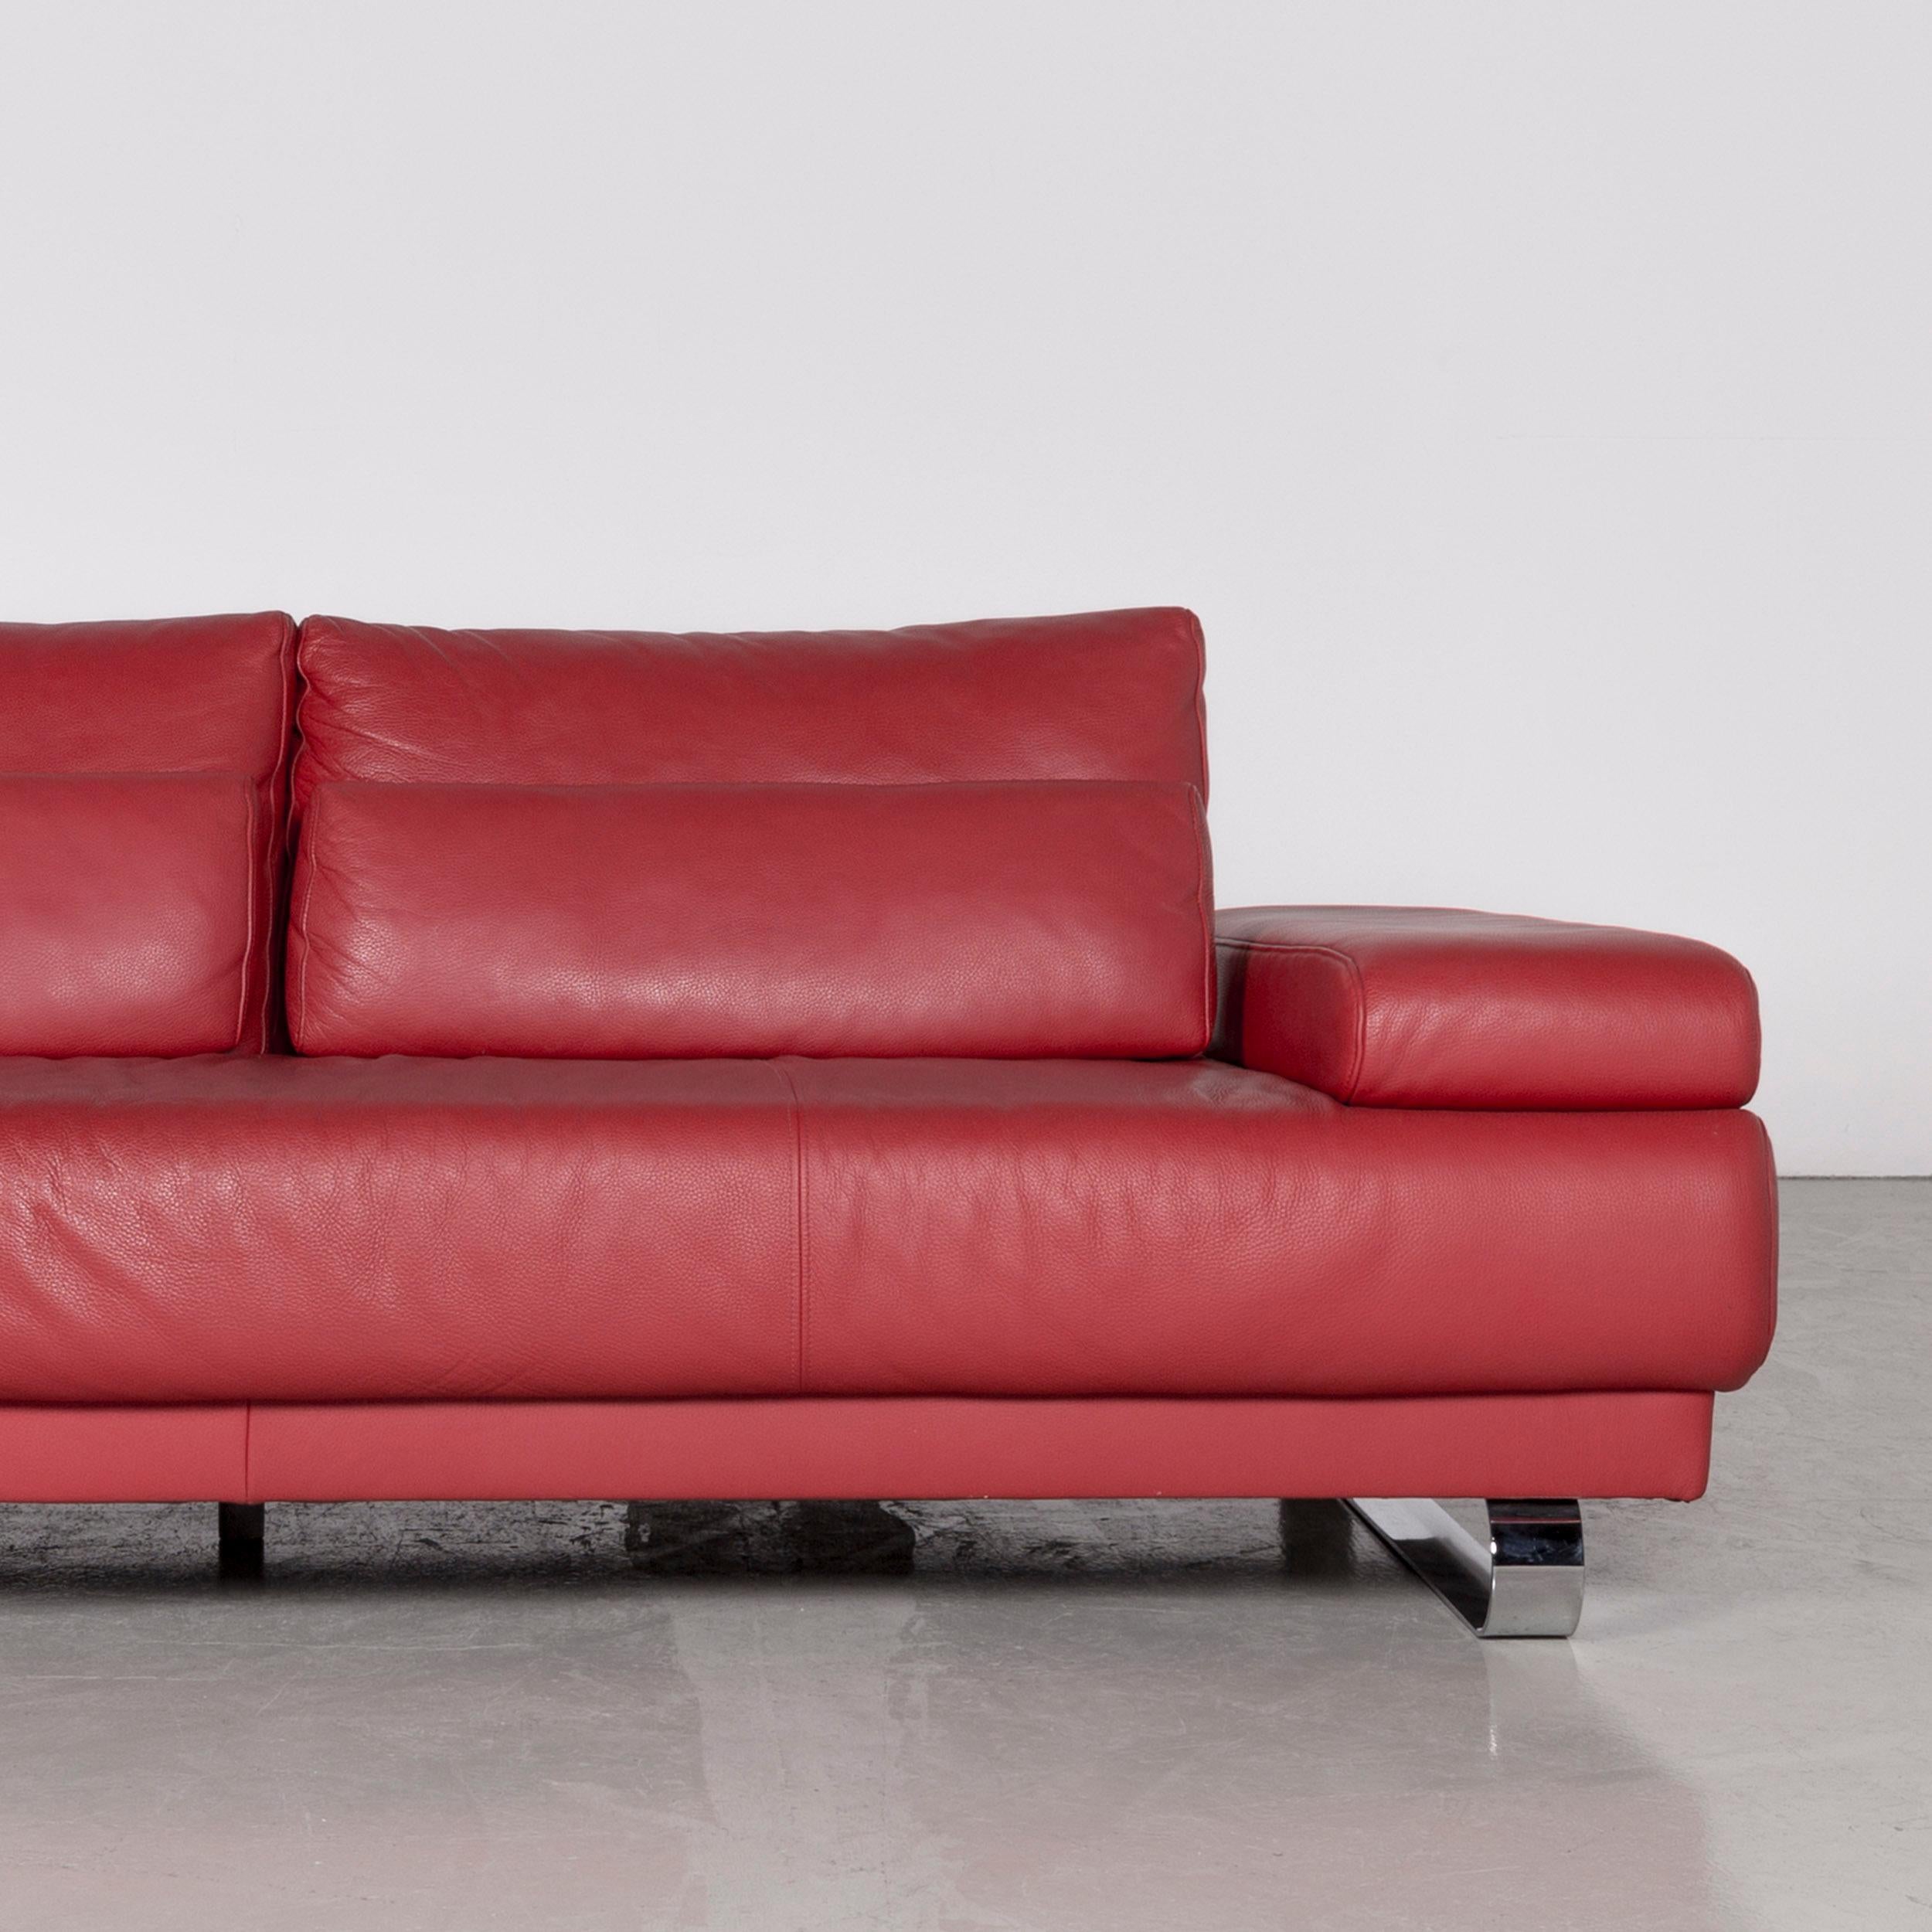 Ewald Schillig Harry Designer Sofa Leather Red Three-Seat Couch For Sale 1